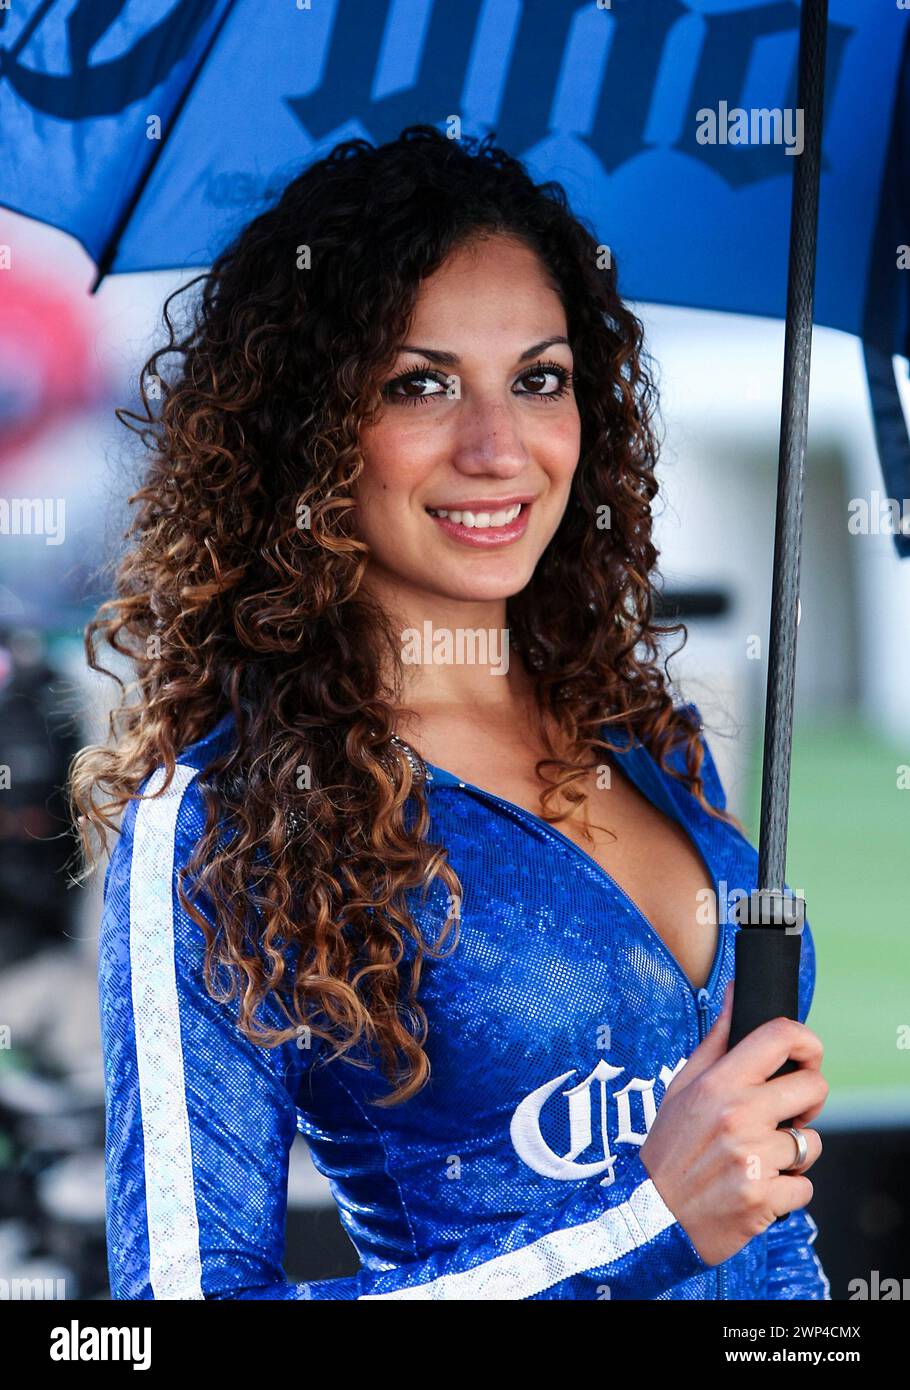 MEXICO CITY, MEXICO - AUGUST 15, 2012:  Corona Beer girl before the international friendly match between the USA and Mexico at Azteca Stadium, in Mexi Stock Photo